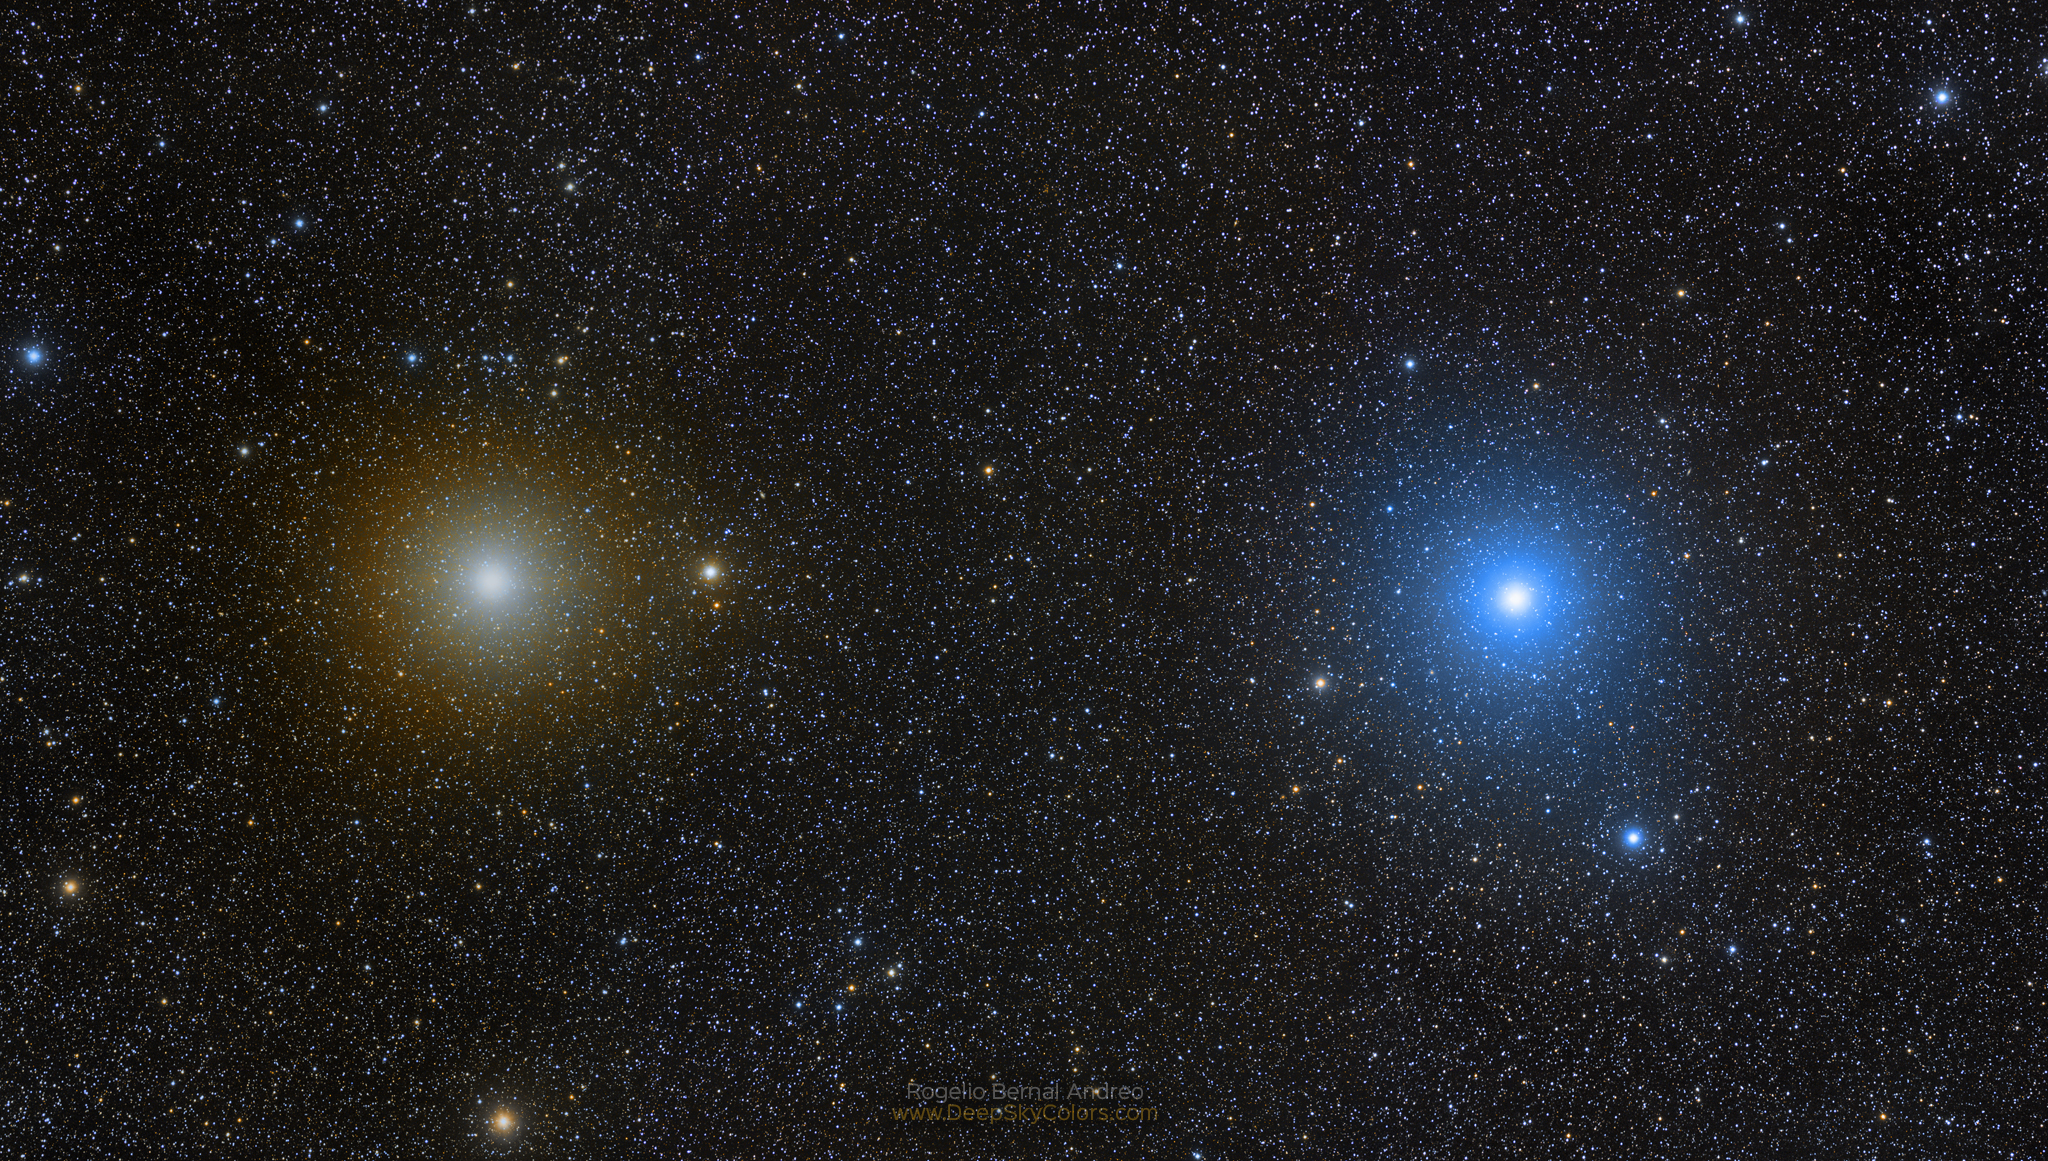 Astronomy Picture of the Day - Σελίδα 6 GeminiCasPol_Andreo_2048